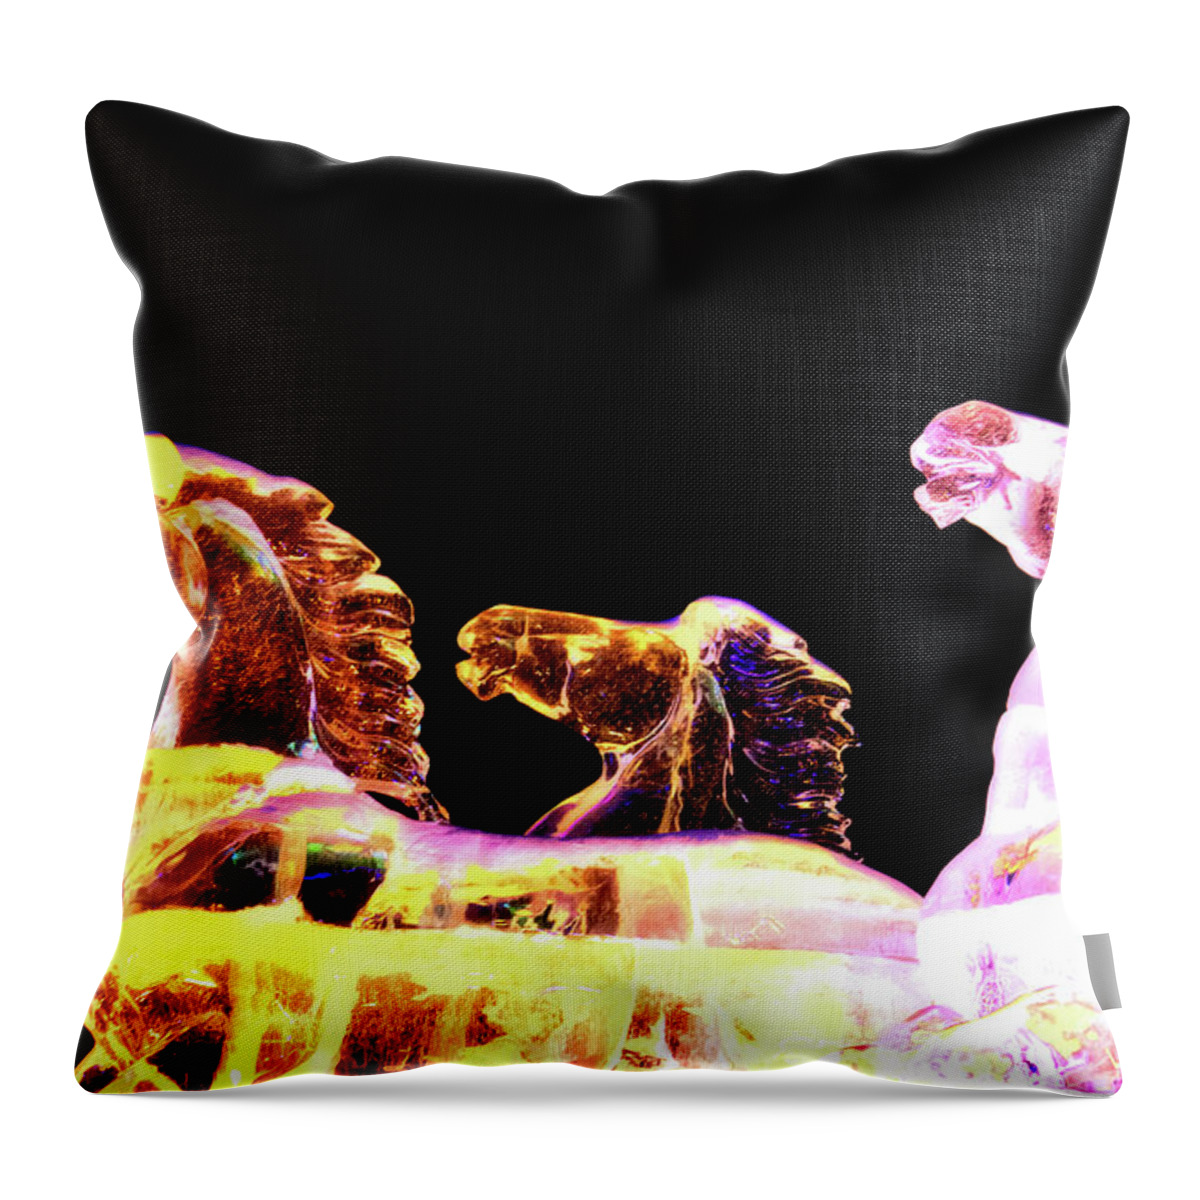 China Throw Pillow featuring the photograph Discovering China by Marisol VB